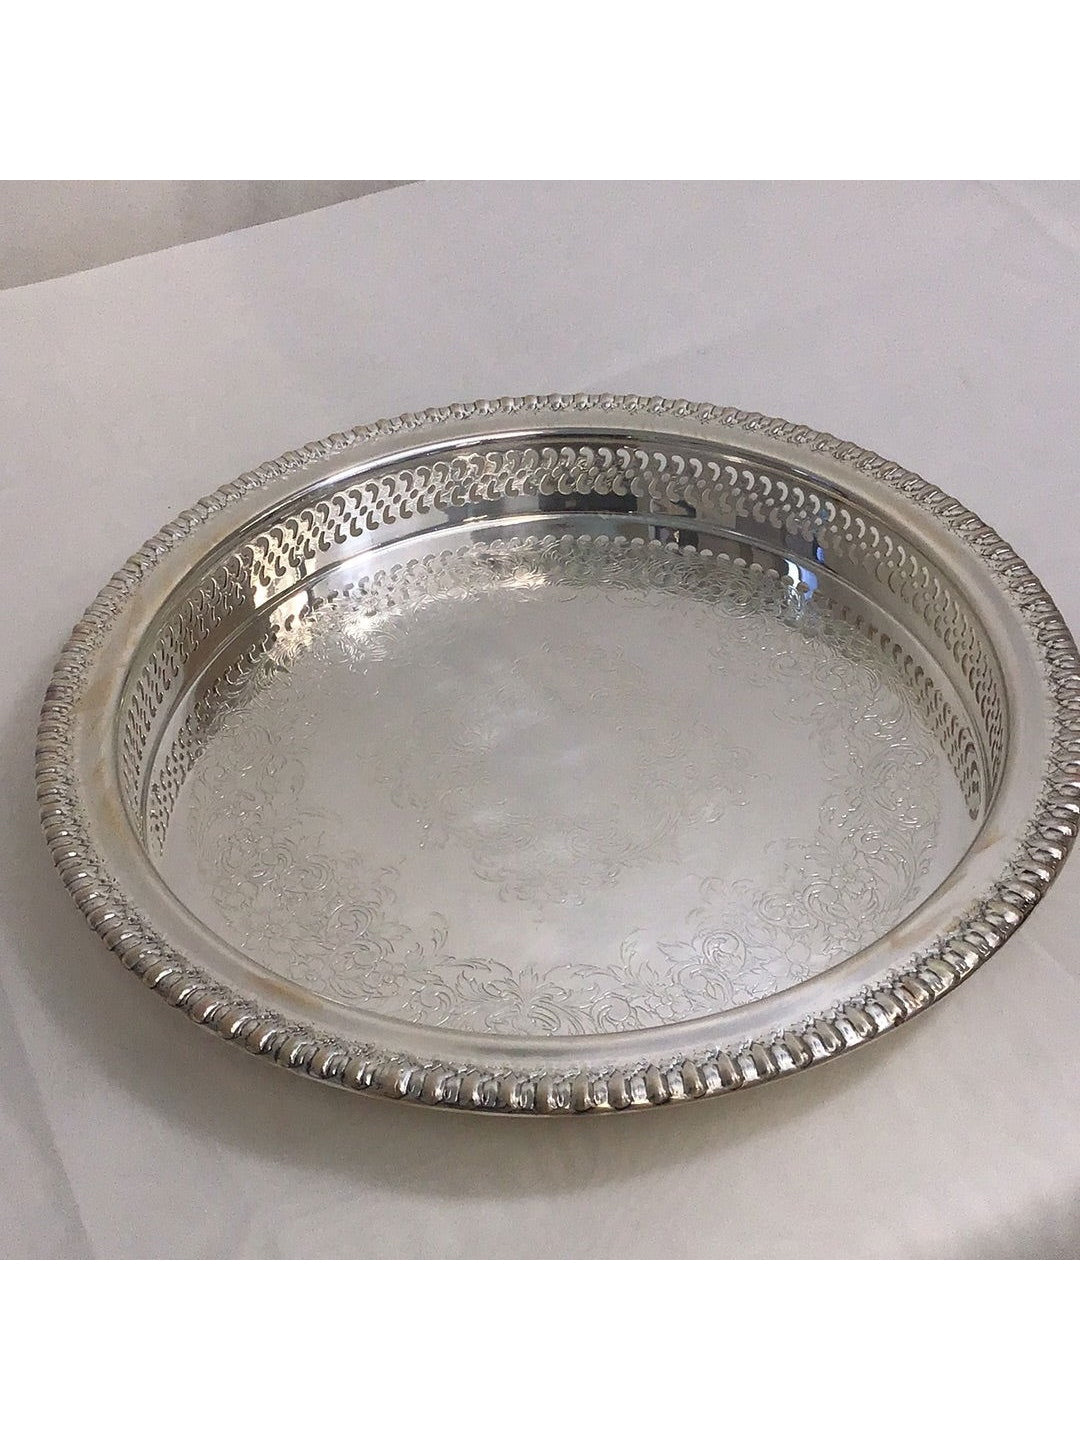 Webster Wilson International Silver Co. Brandon Hall #7570G Tray - The Kennedy Collective Thrift - 